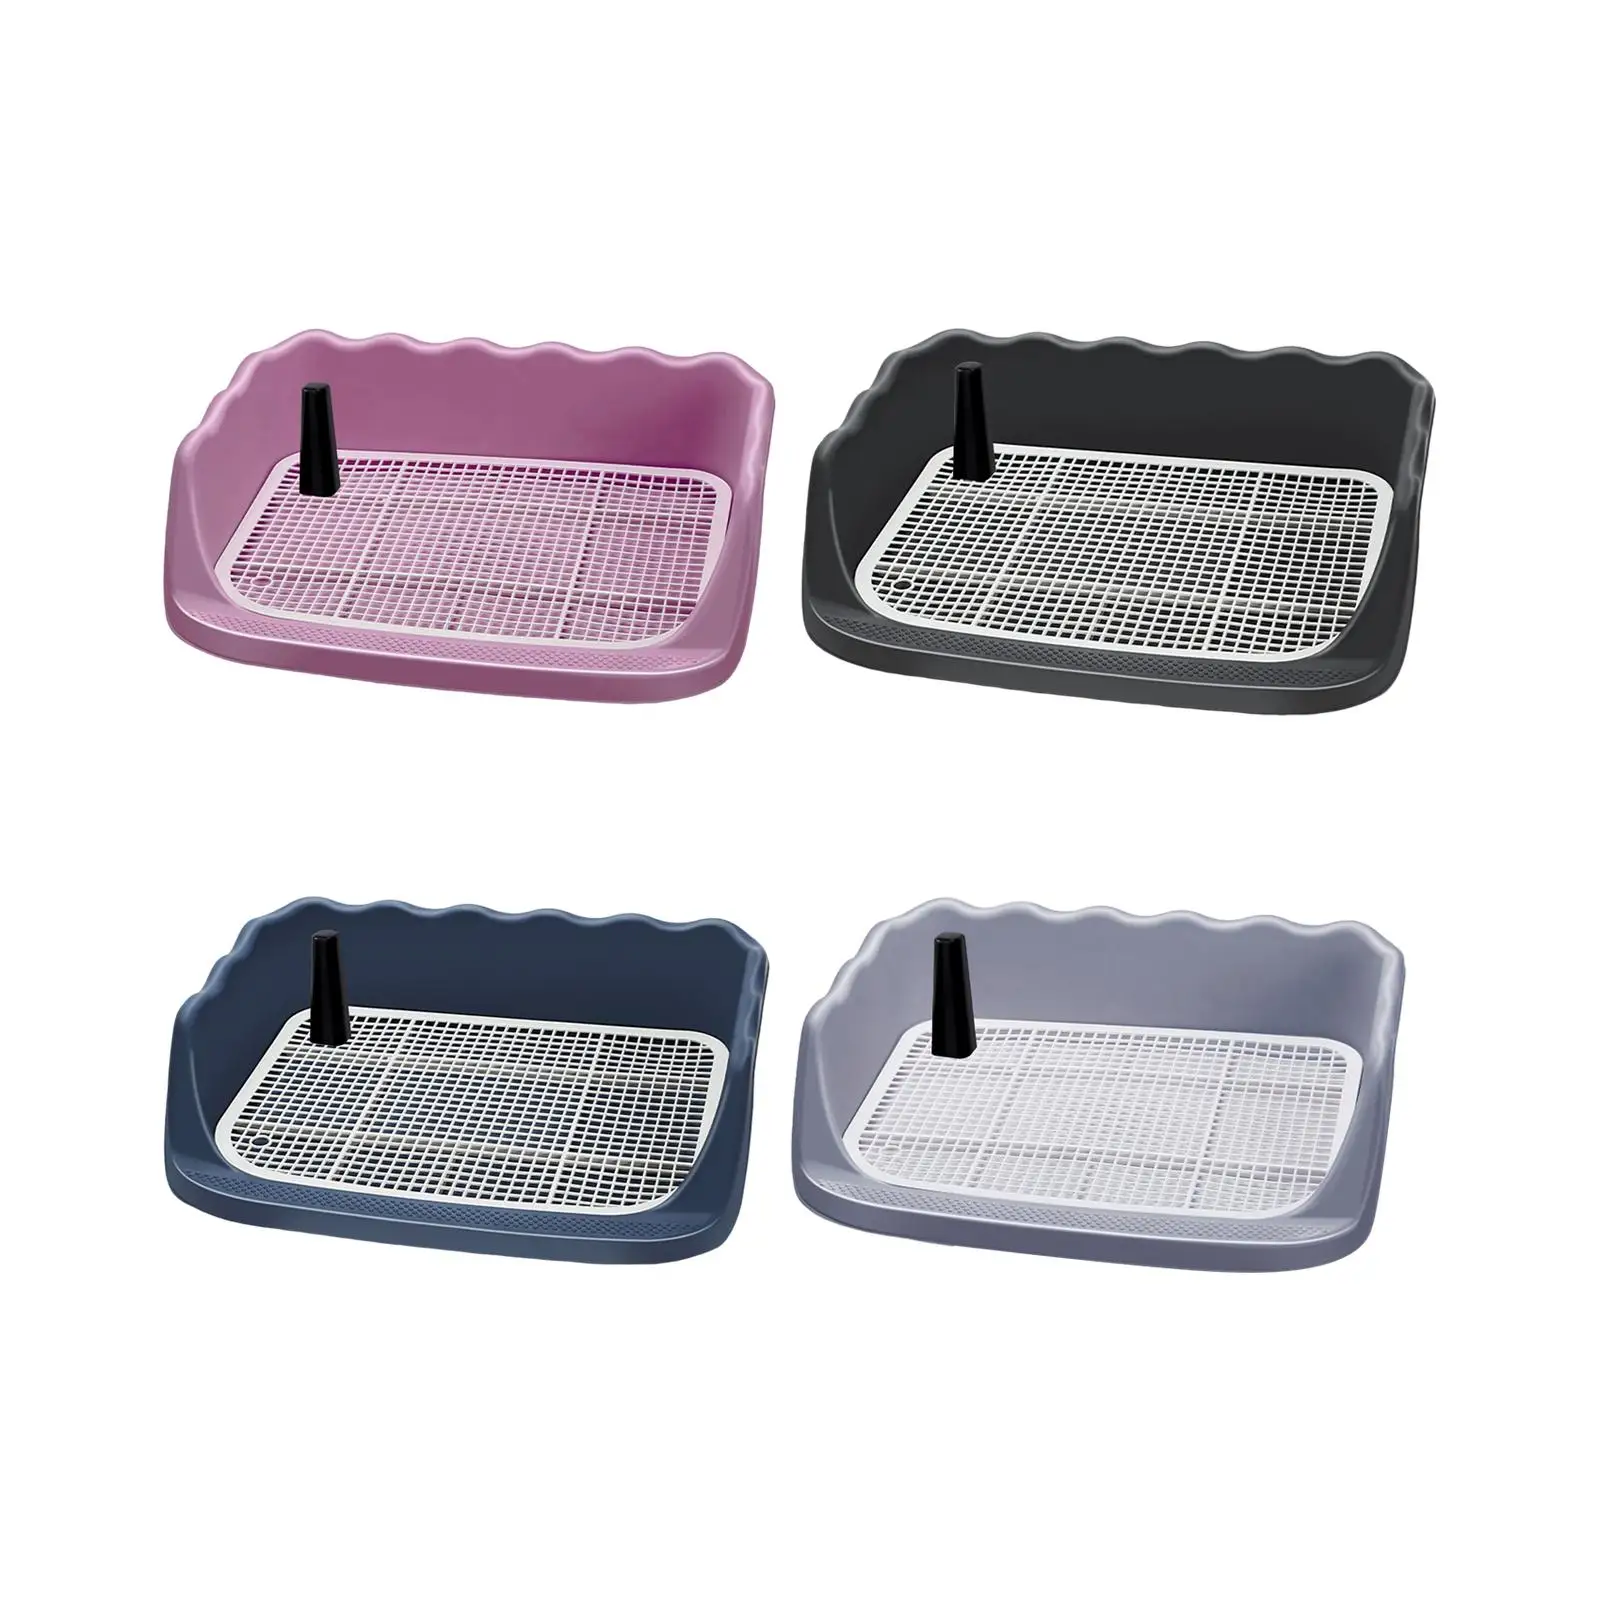 Indoor Dog Potty Tray Dogs Toilet Guardrail Design Large with Removable Post